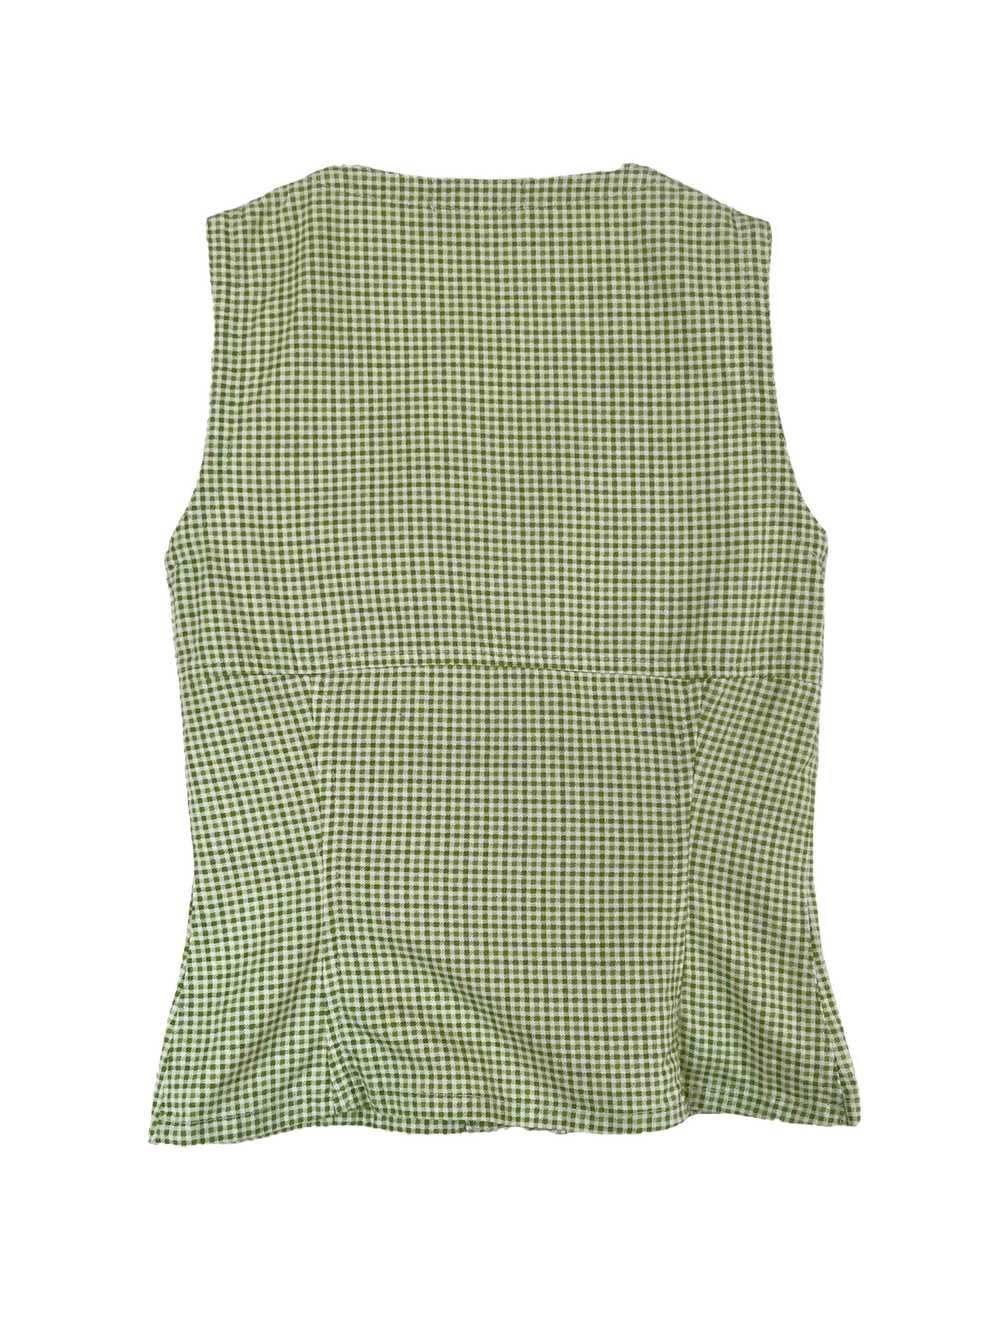 Gingham top - Green and white gingham top with bu… - image 6